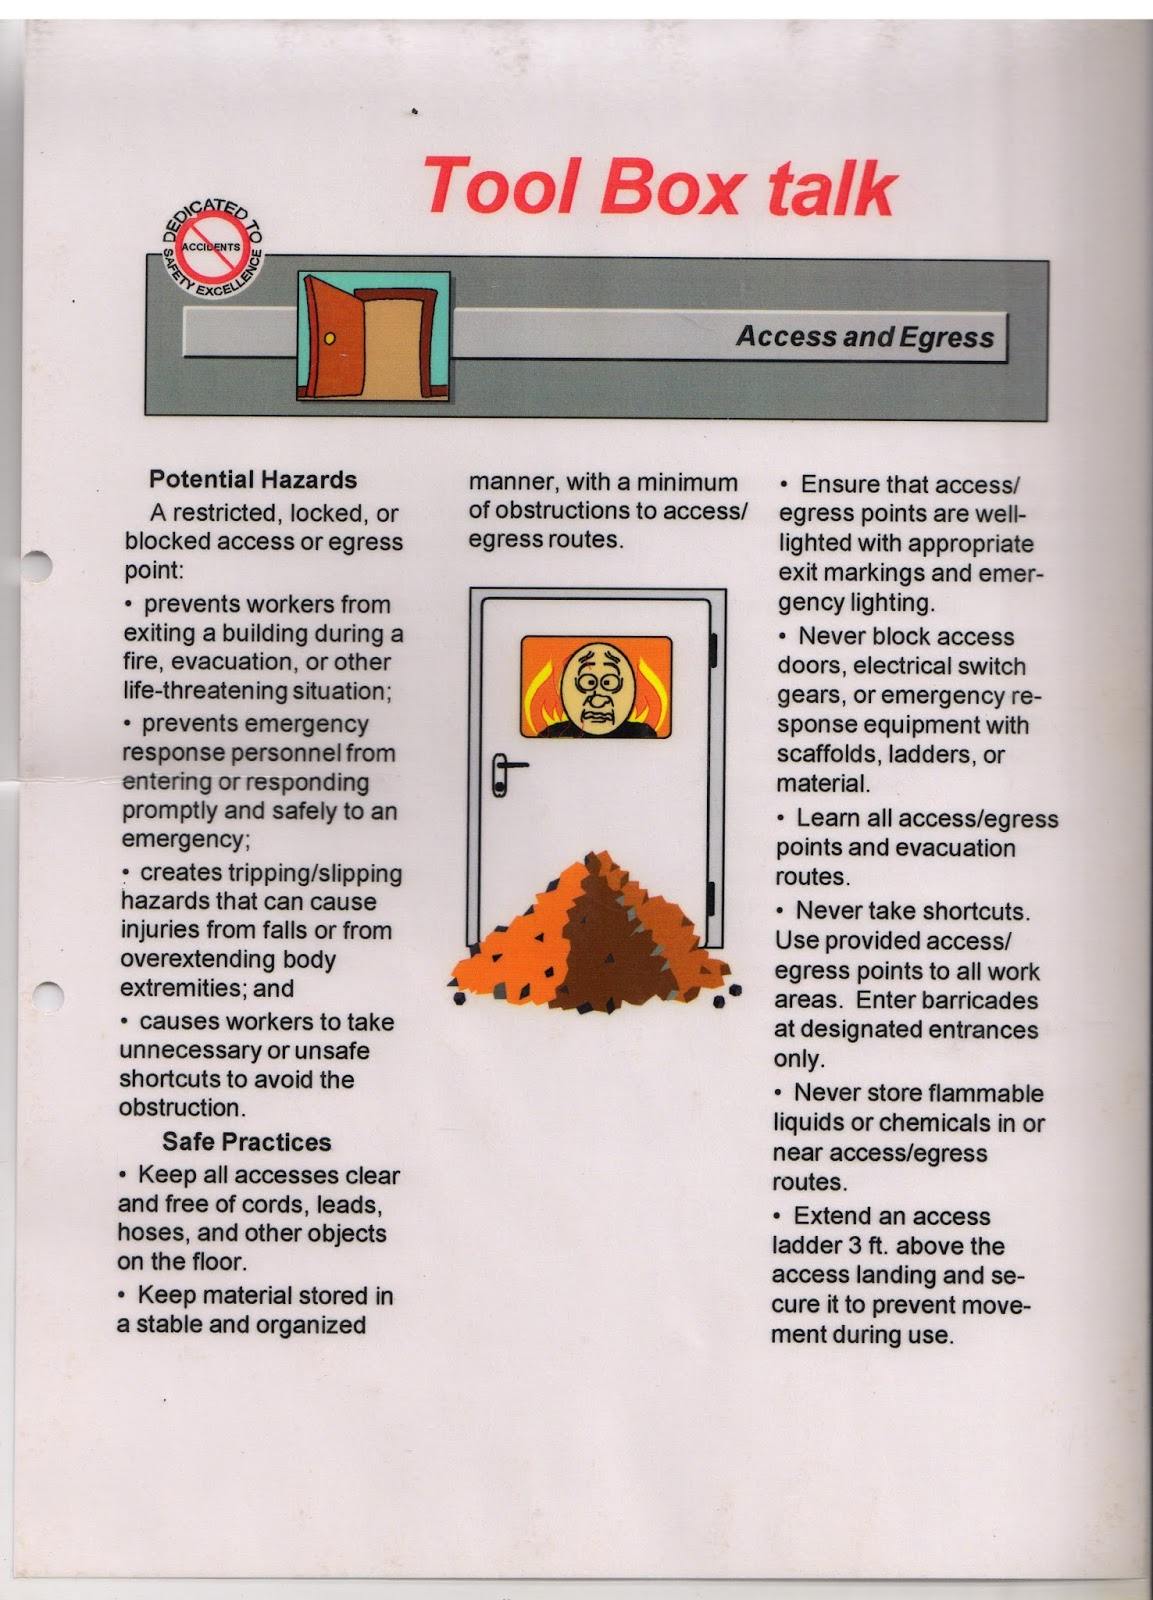 simple-safety-toolbox-talk-material-2nd-part